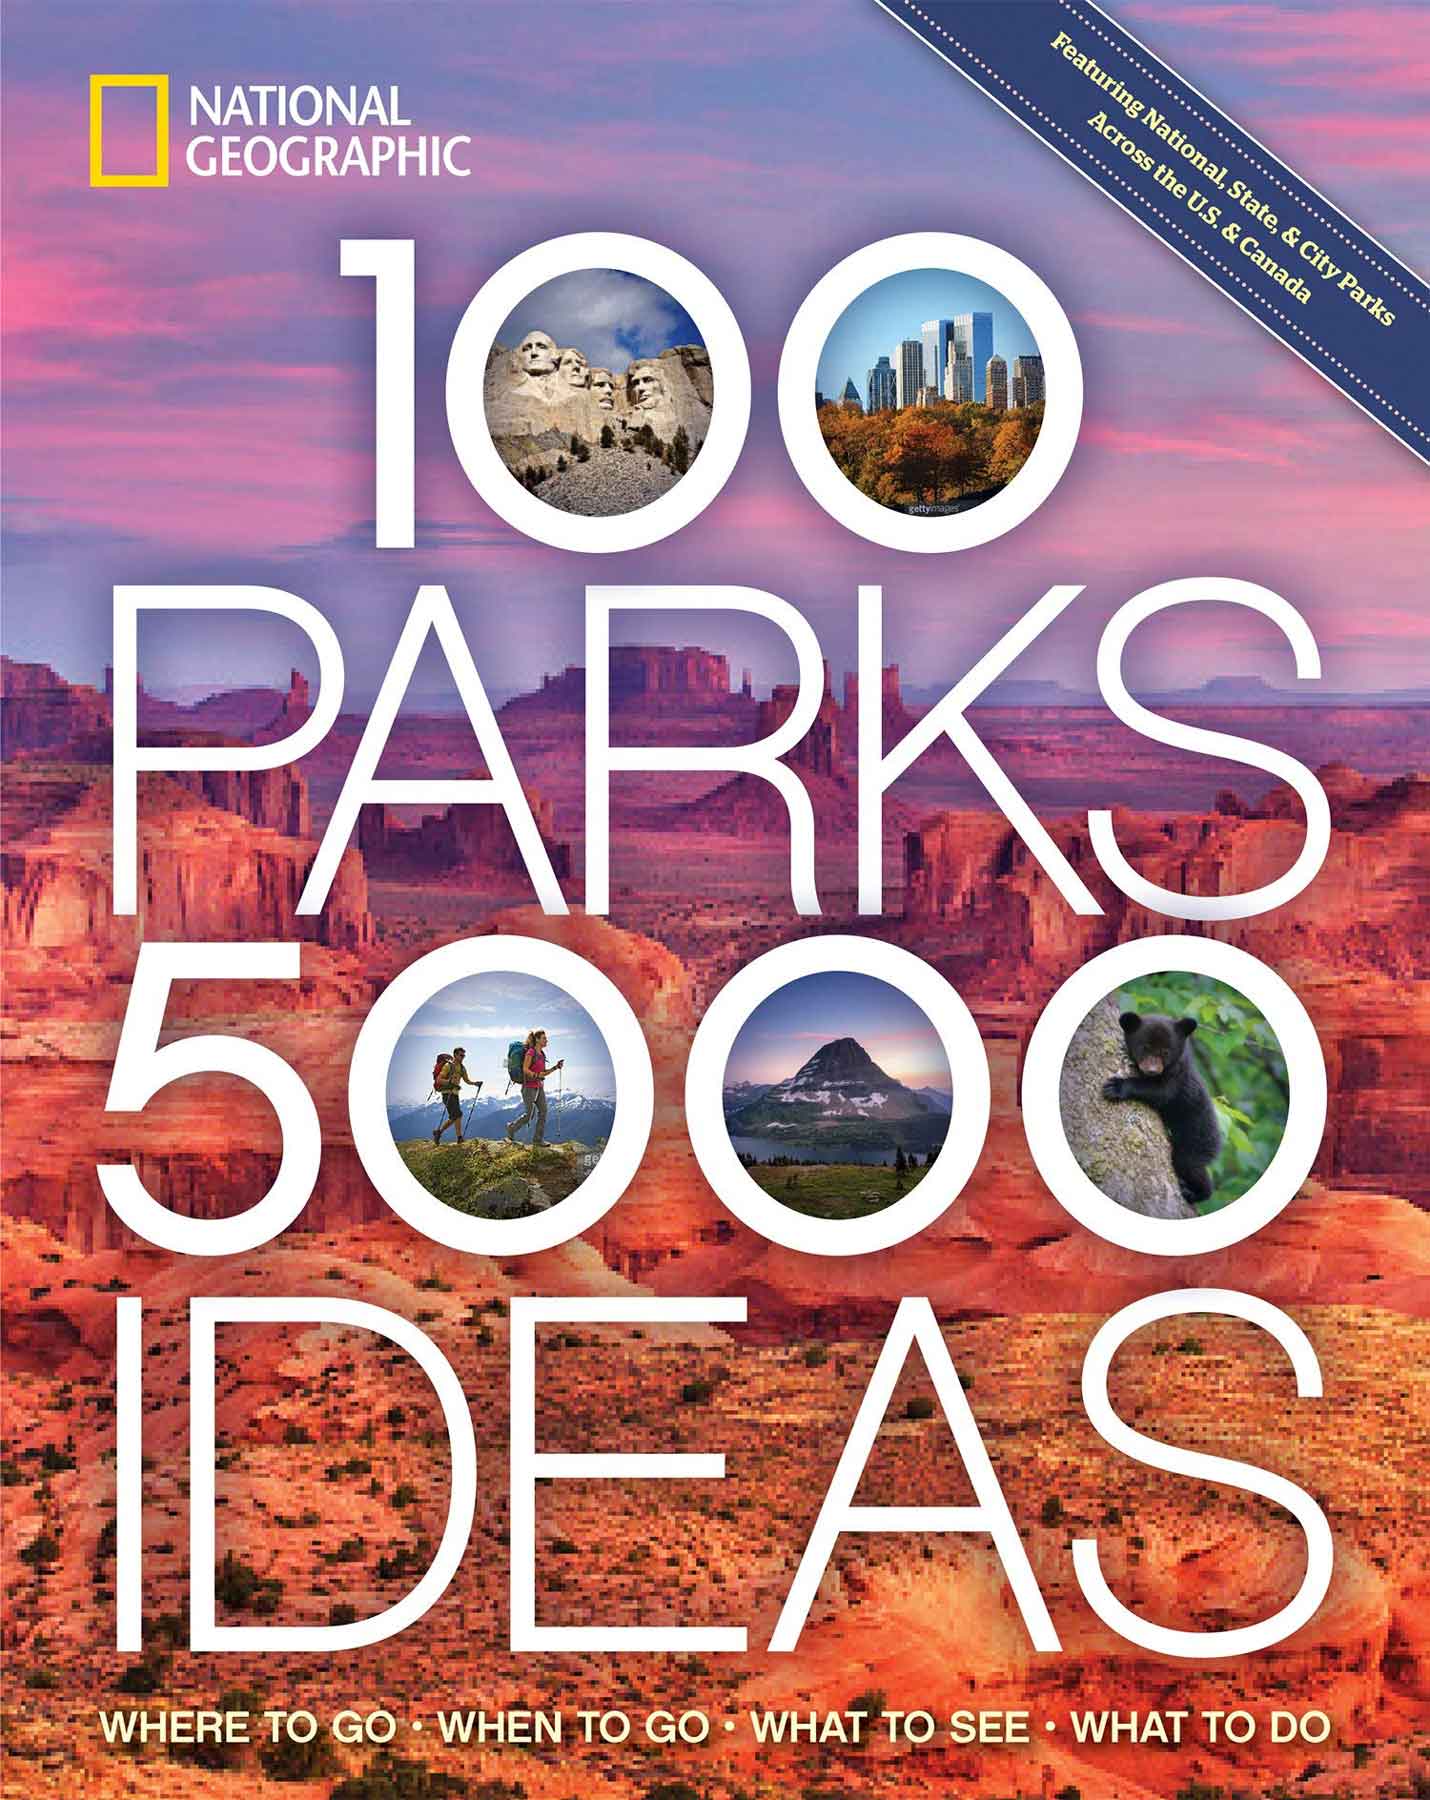 our national monuments national park photo books